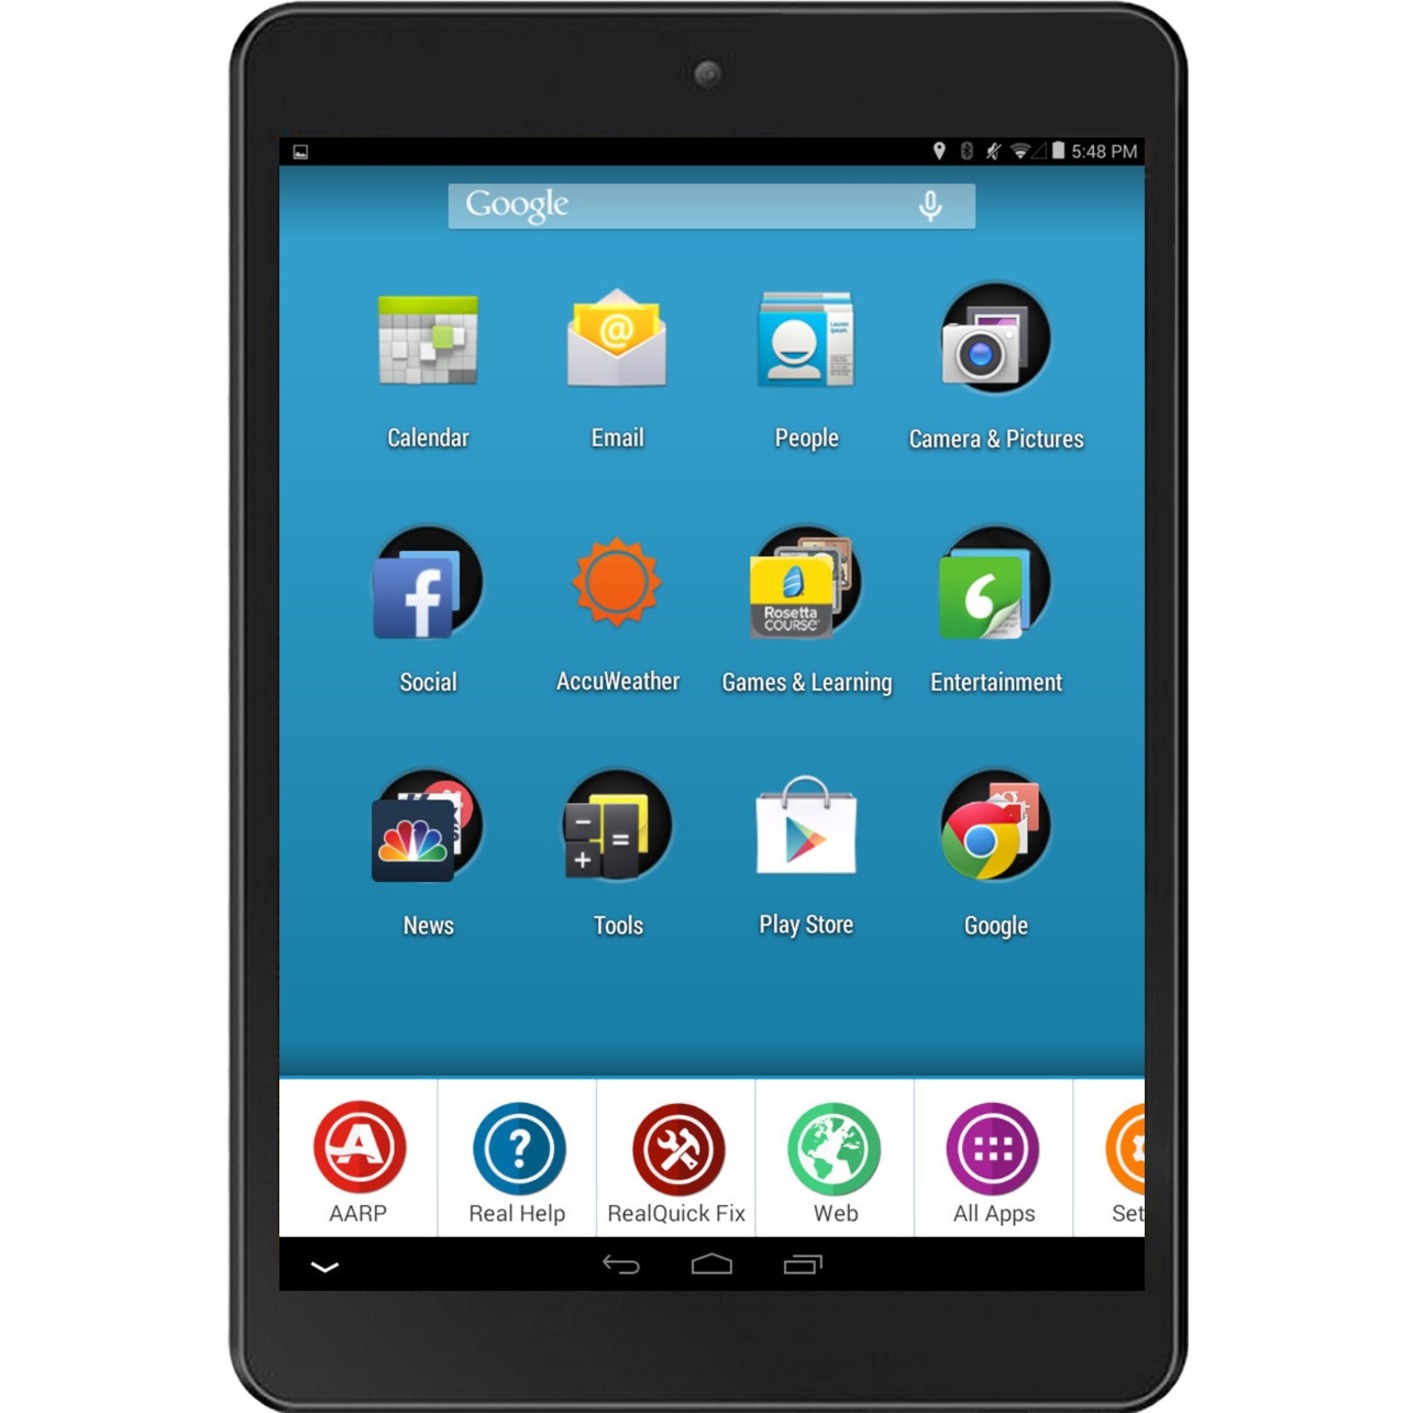 AARP RealPad MA7BX2 Tablet, 7.9", Atom Dual-core (2 Core) 1.20 GHz, 1 GB RAM, 16 GB Storage, Android 4.4 KitKat, Black - image 1 of 6